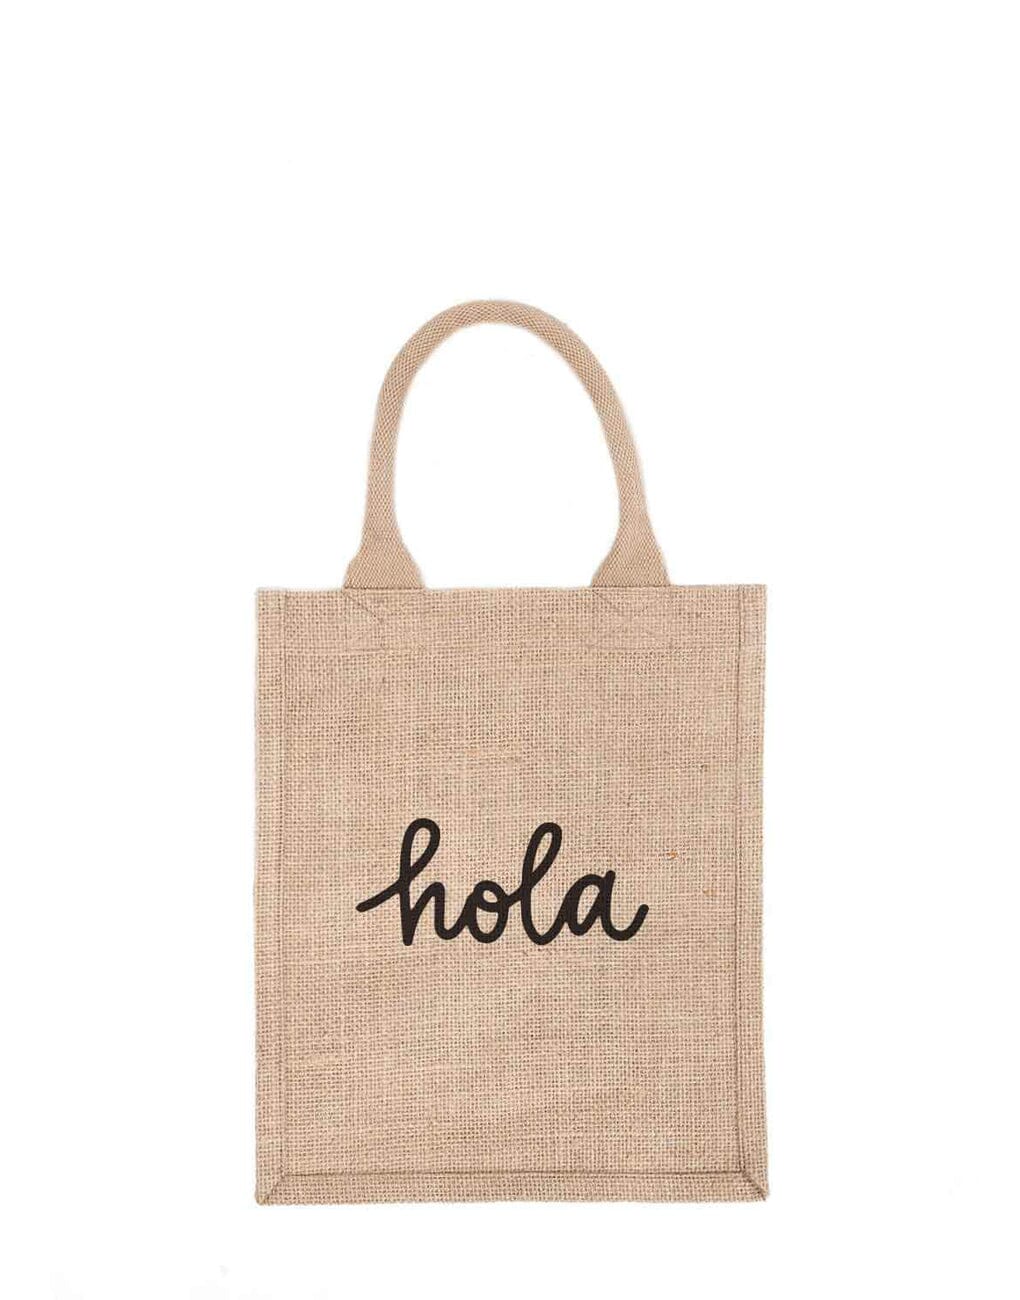 Medium Hola Reusable Gift Tote In Black Font | The Little Market